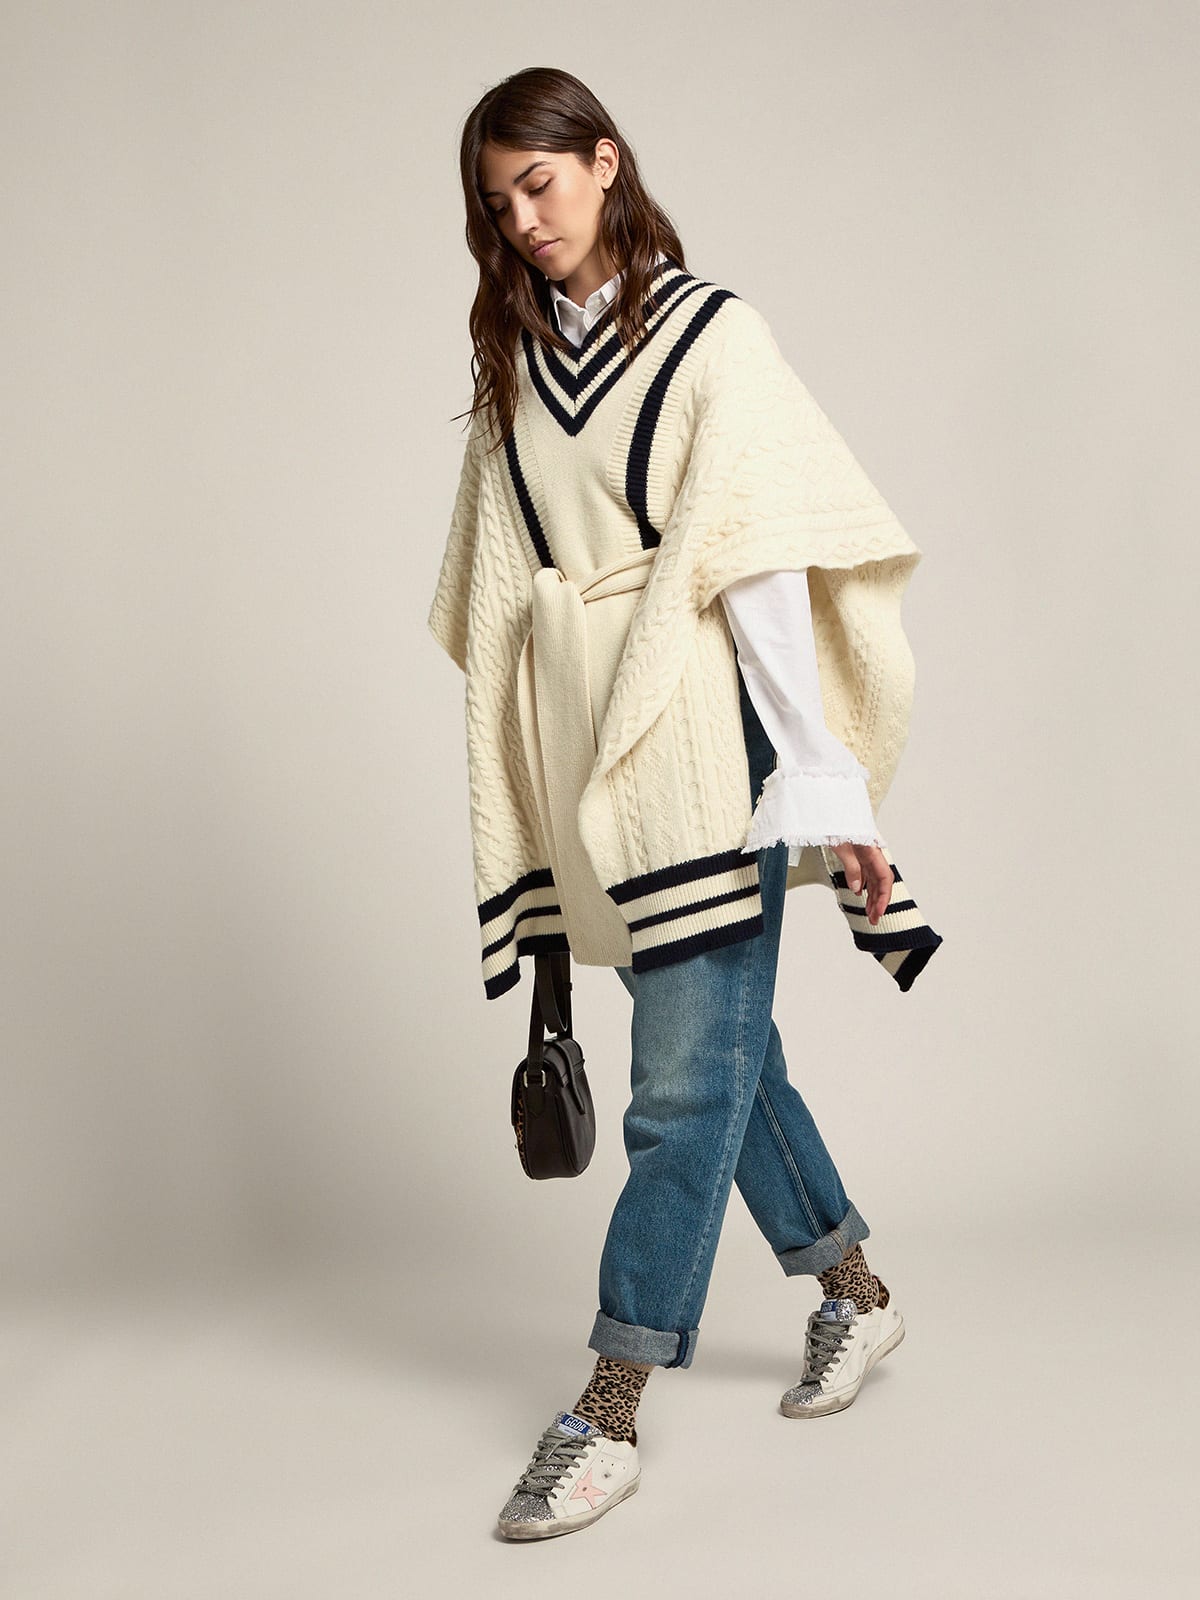 Golden Goose - Oversize Journey Collection Dane cape in natural white-colored wool with contrasting blue details in 